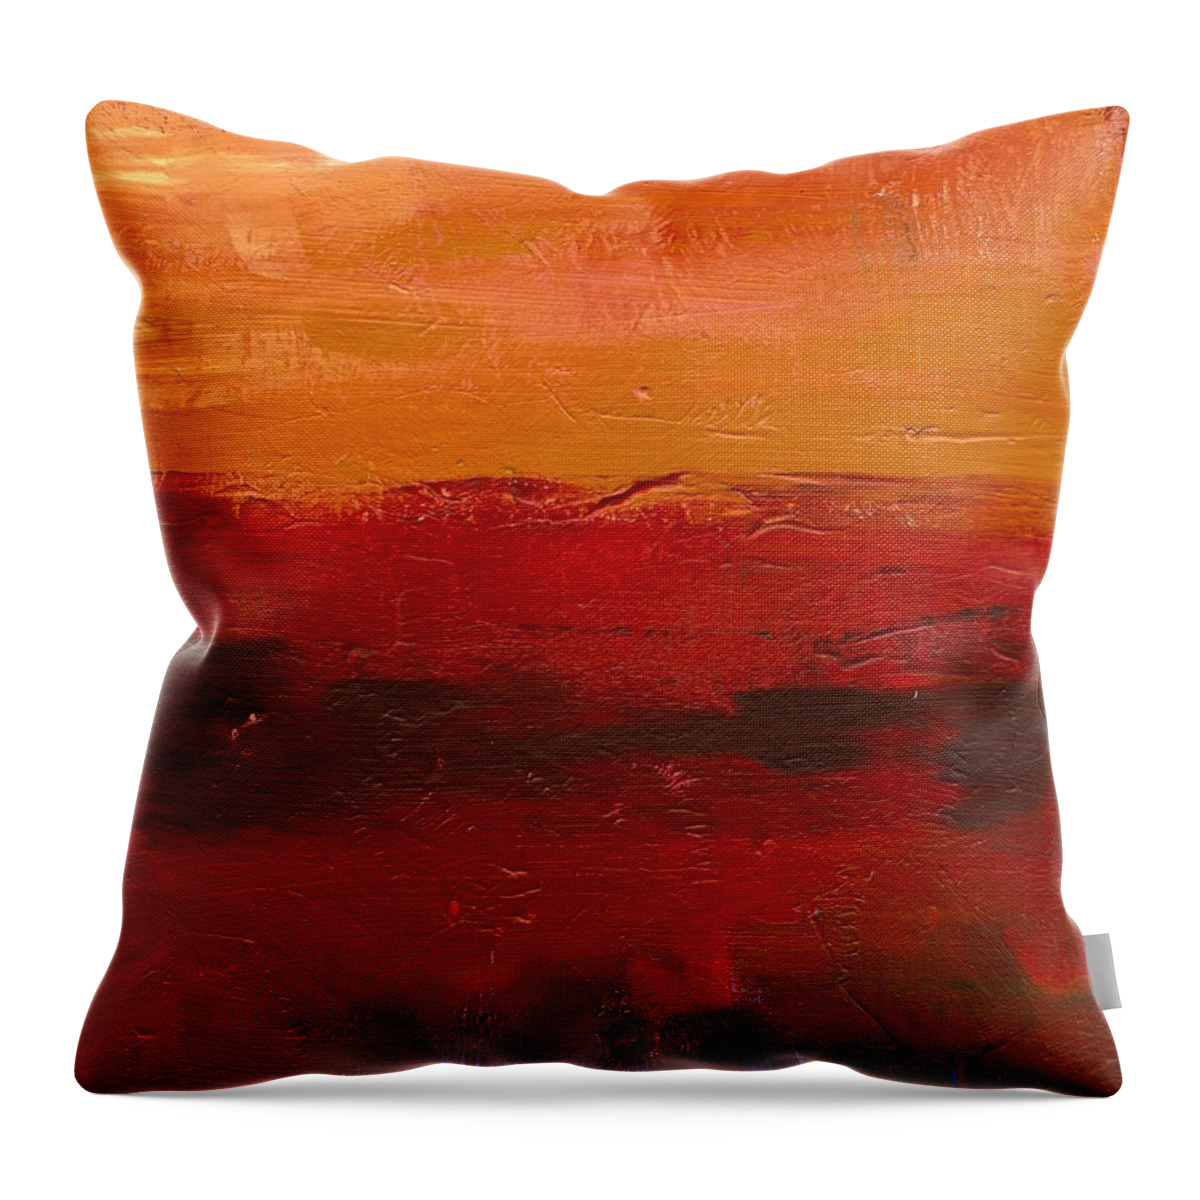 Art Throw Pillow featuring the digital art Abstract Painting #1 by Quantum orange